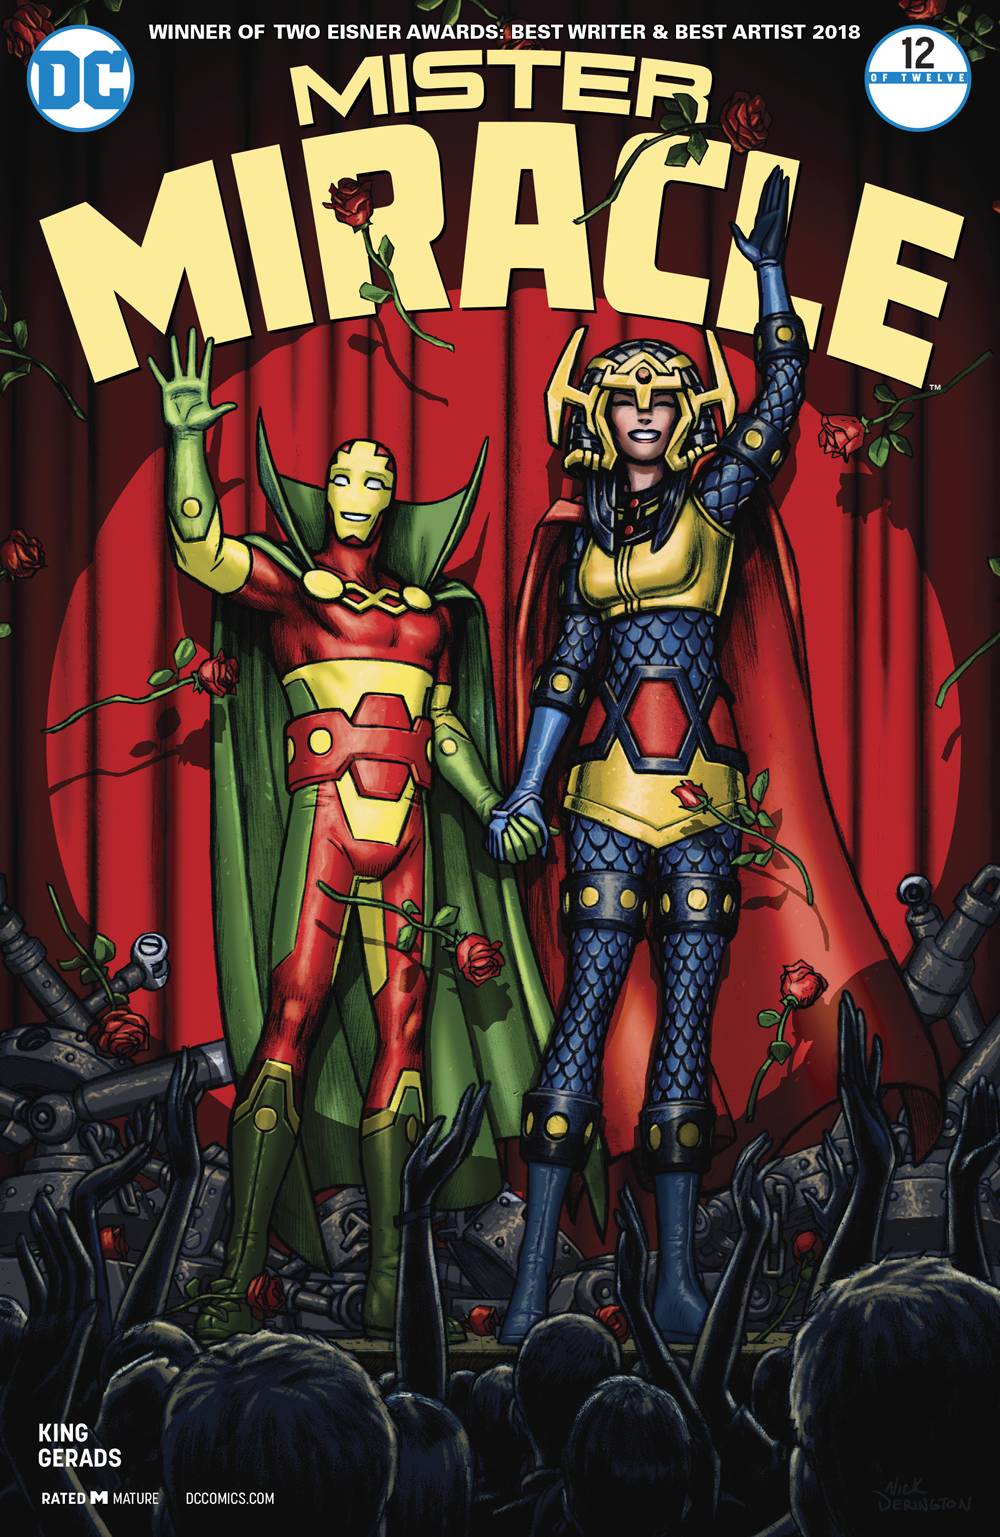 Mister Miracle #12 (of 12) [2018]